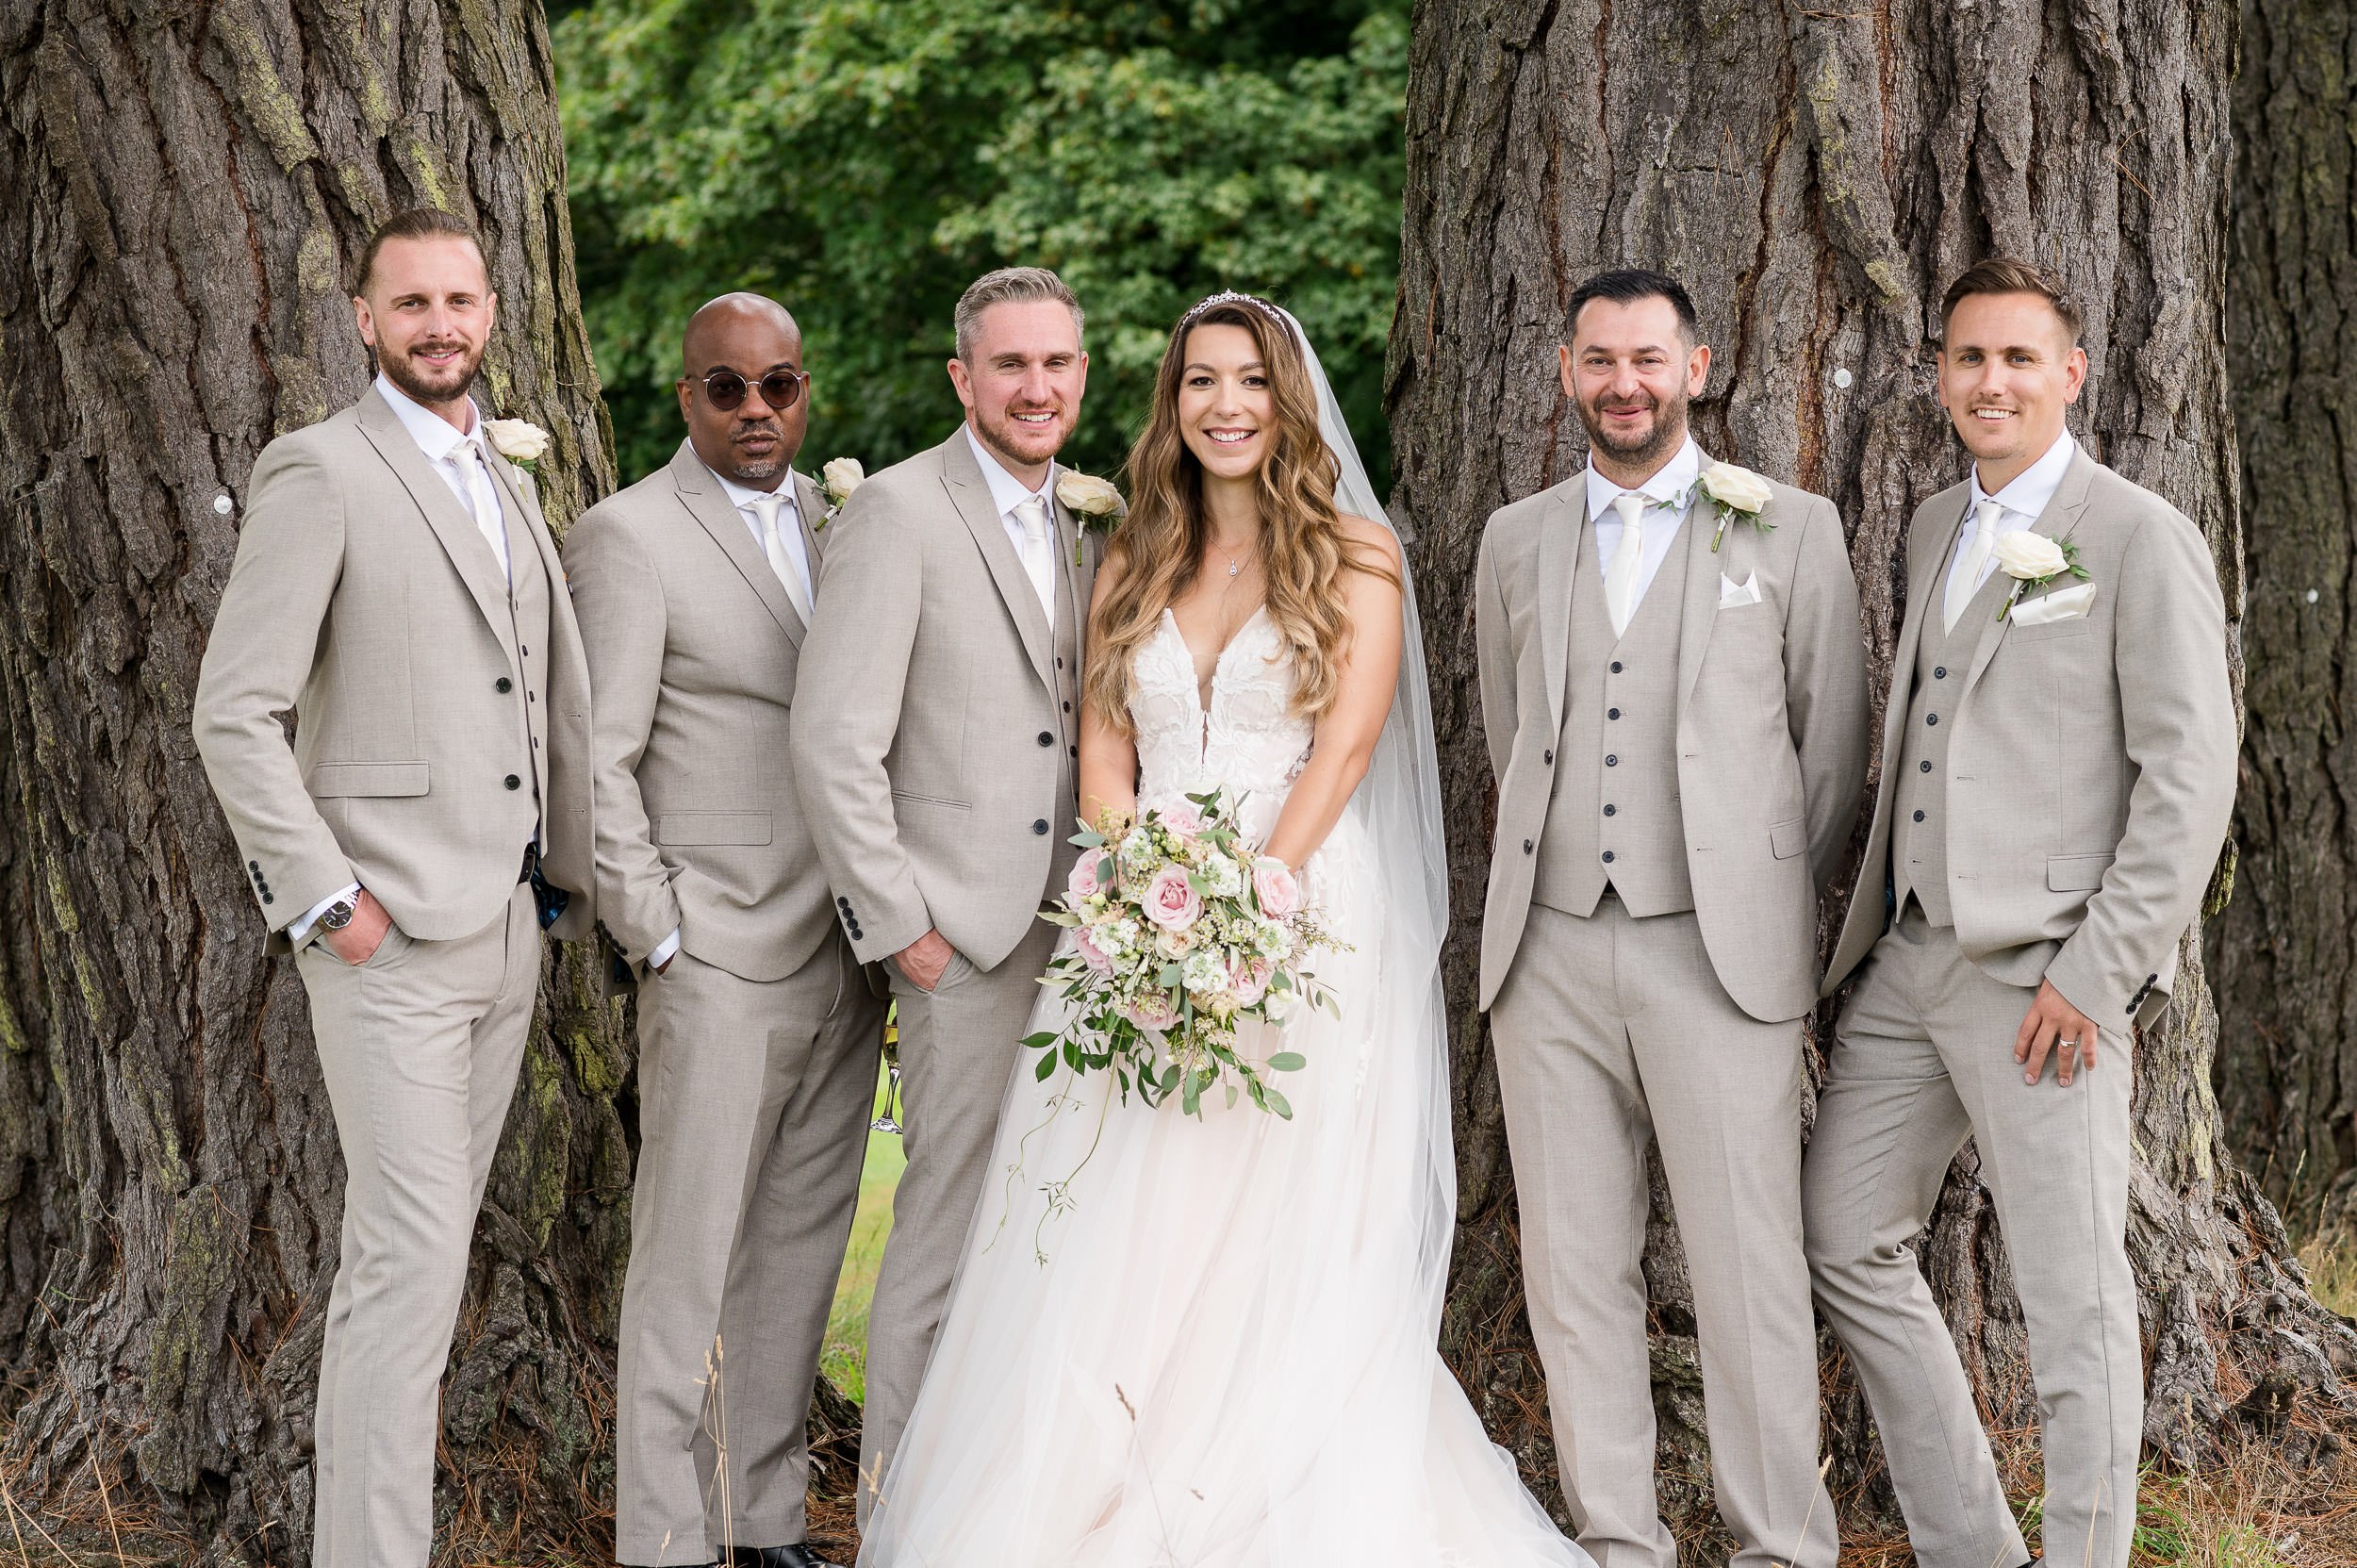 Bride with all the groomsmen at Hethfelton House wedding - Formal group photo